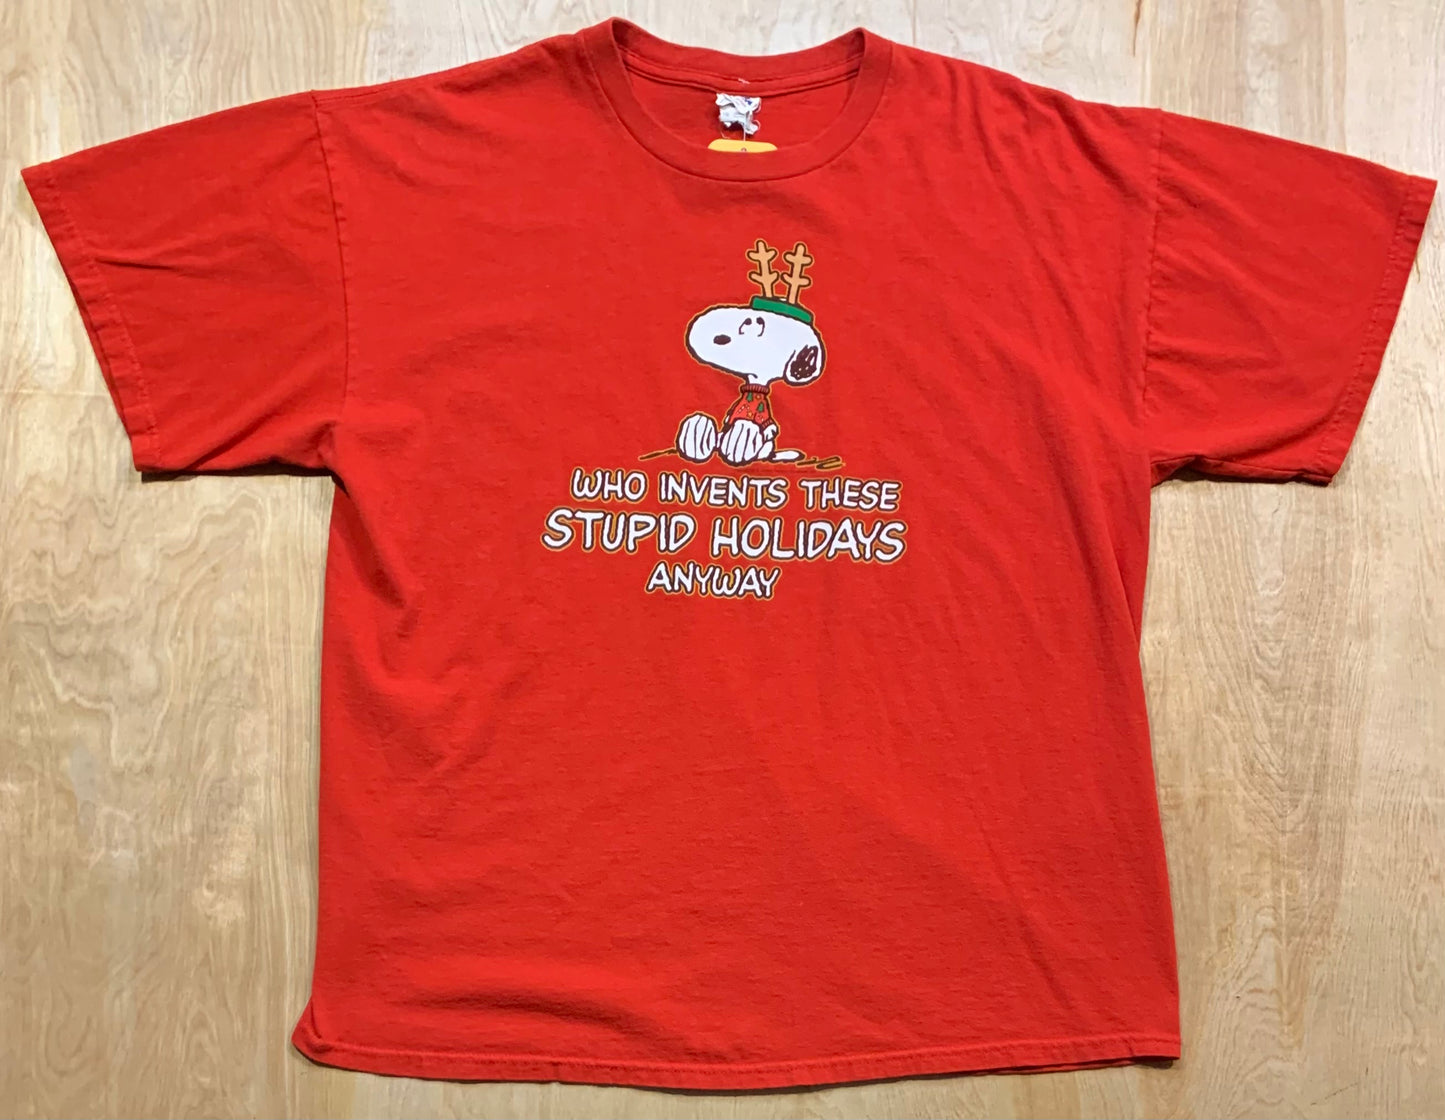 Snoopy "Who Invents These Stupid Holidays Anyway" T-Shirt